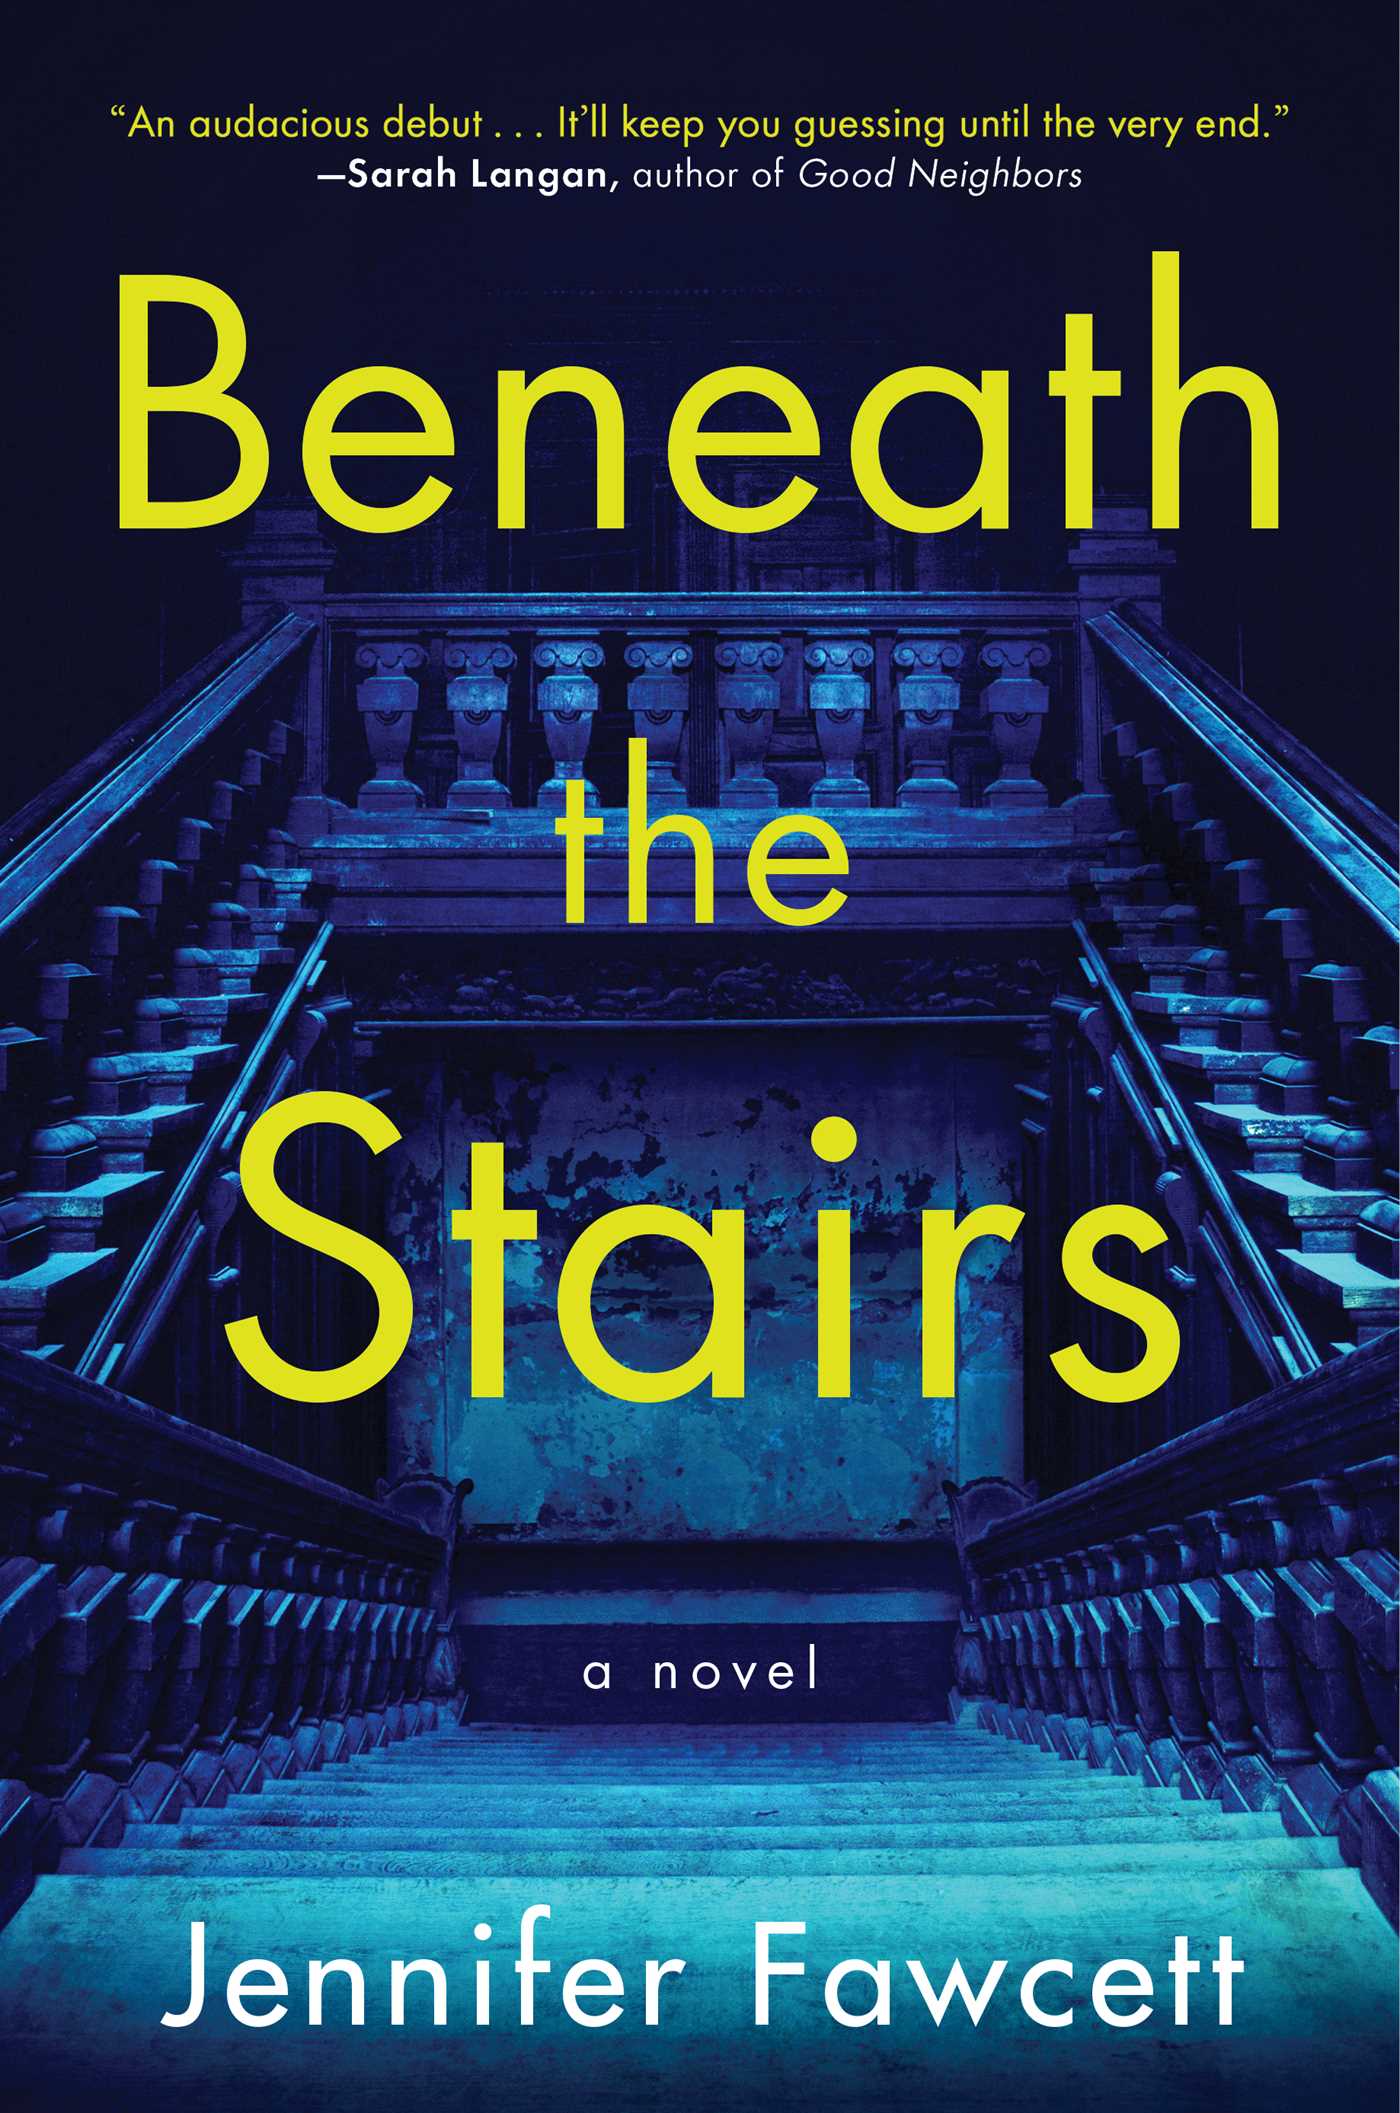 Image for "Beneath the Stairs"